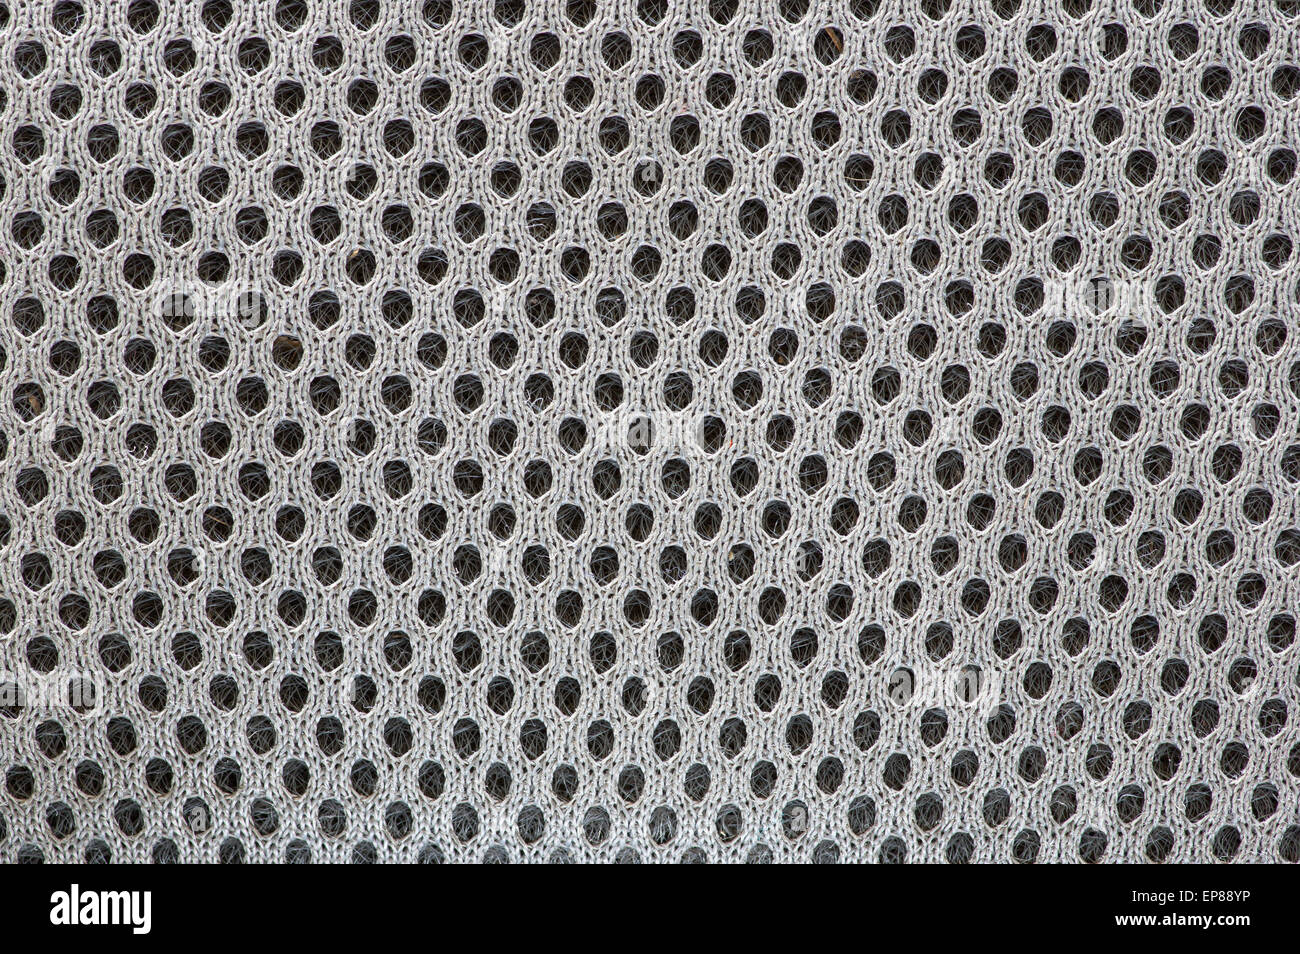 macro image of open textured woven fabric showing the individual threads and holes as a background Stock Photo